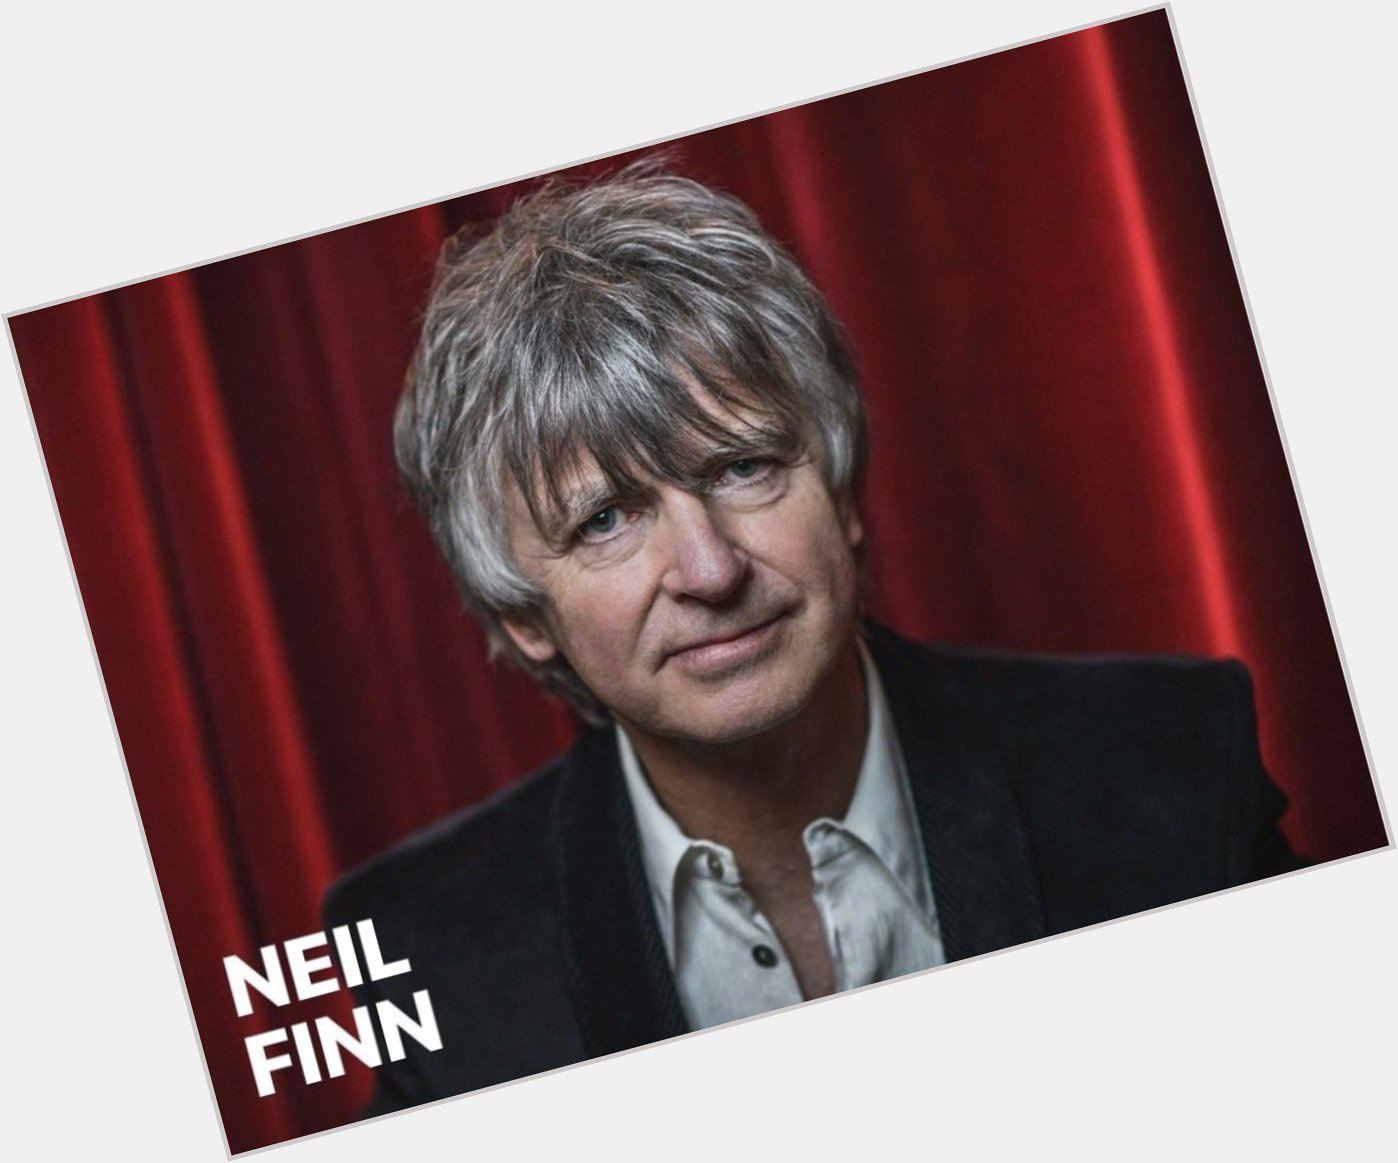 Happy 64 birthday to the Crowded House vocalist Neil Finn! 